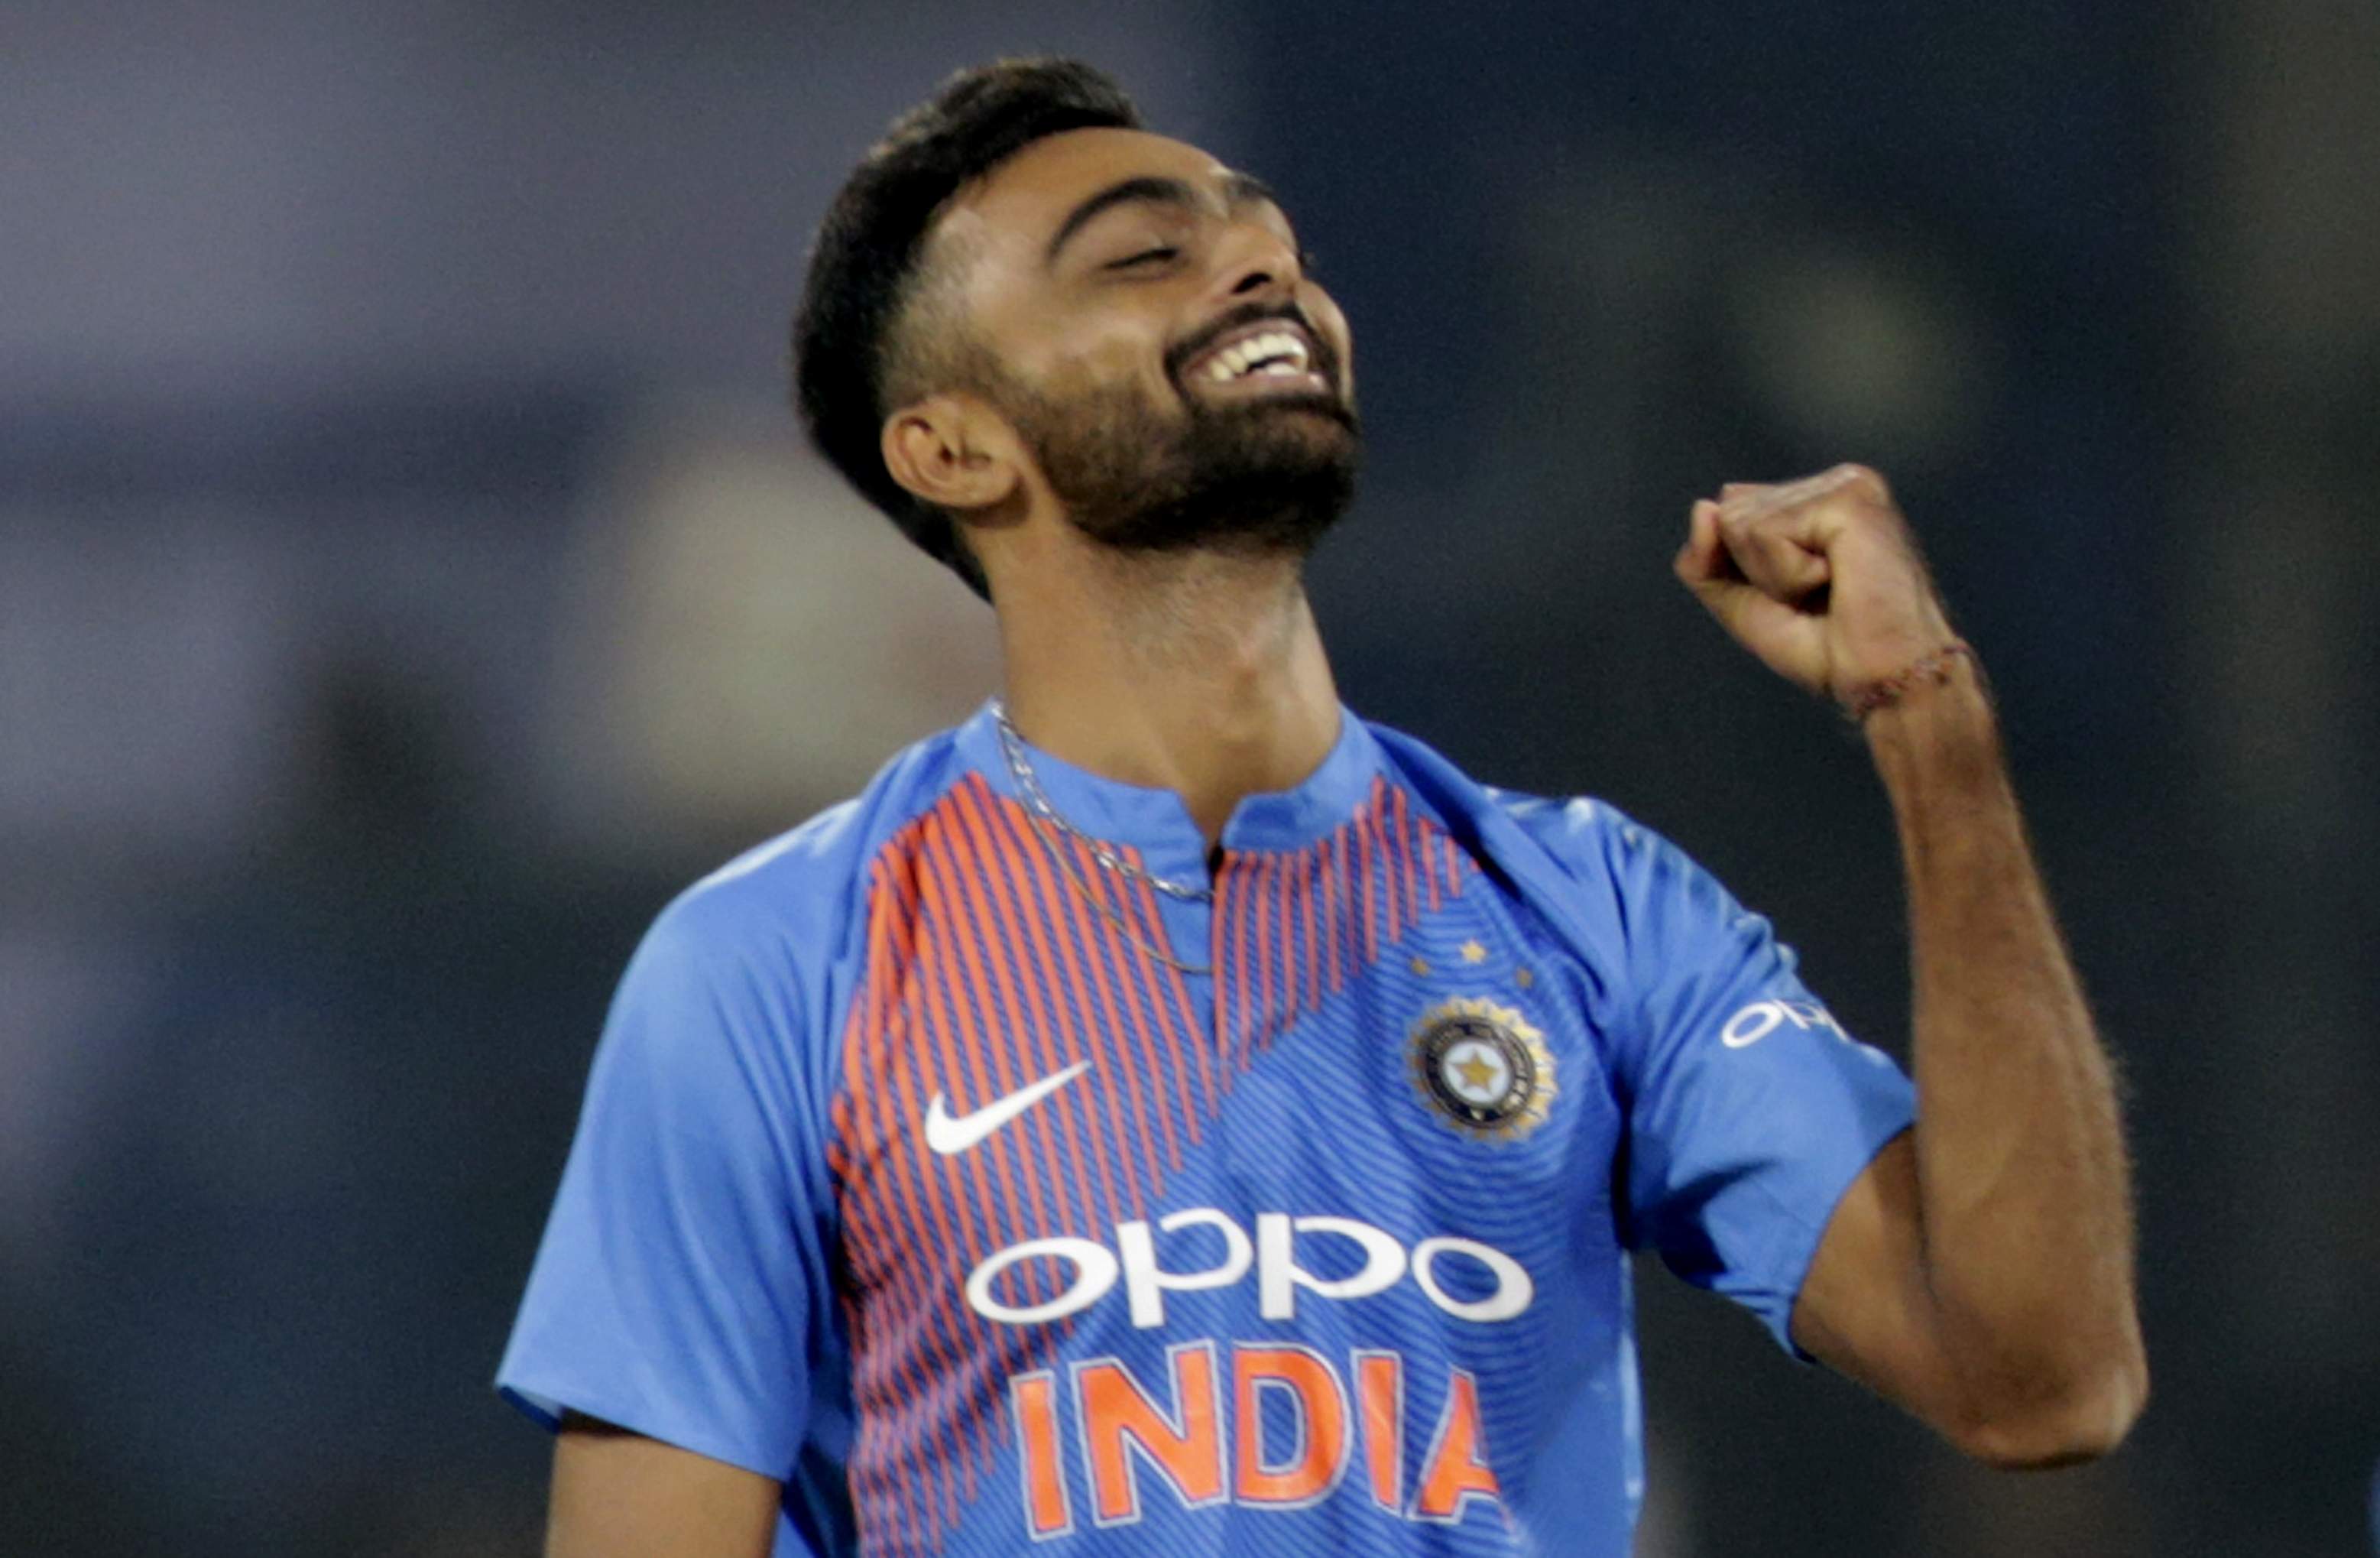 Jaydev Unadkat, who was awarded the Man of the Match